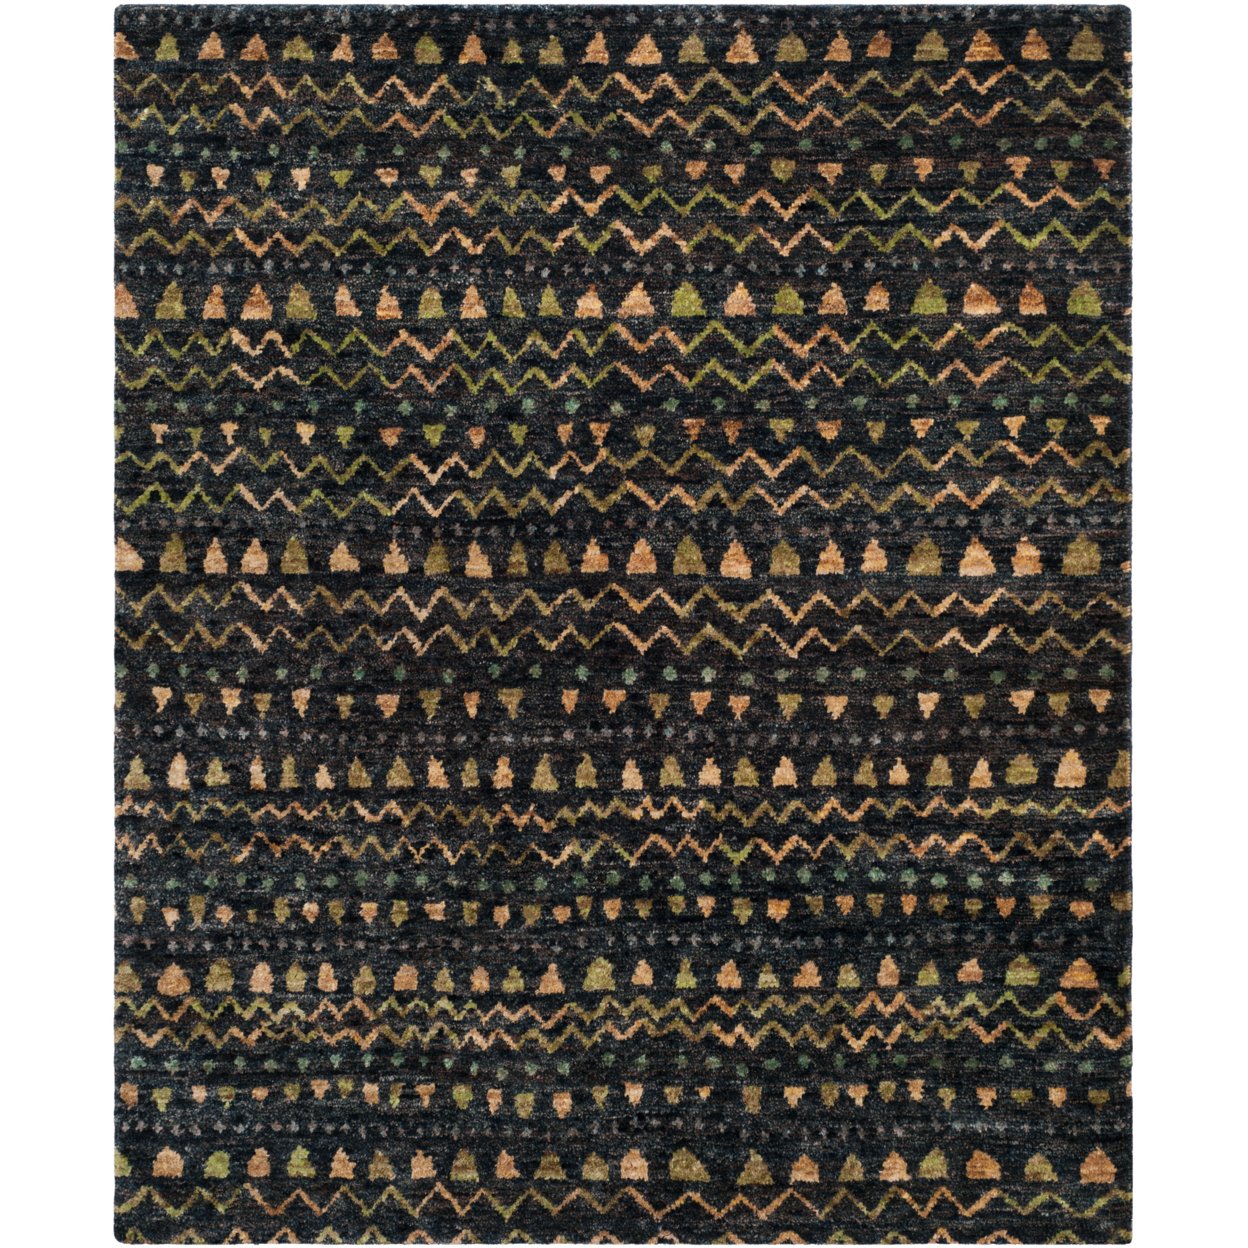 SAFAVIEH Bohemian BOH653A Hand-knotted Black / Gold Rug - 8' X 10'